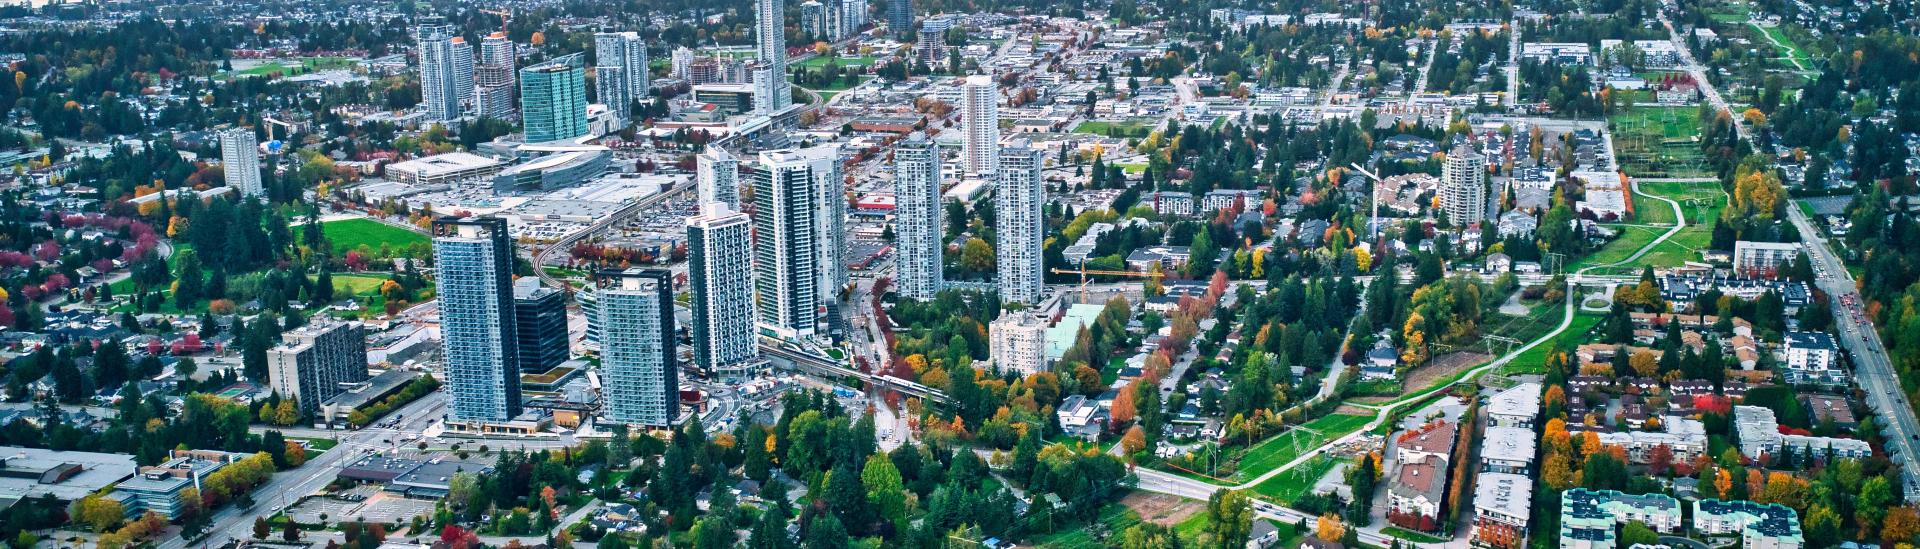 Aerial view of Downtown Surrey with mountains in the background